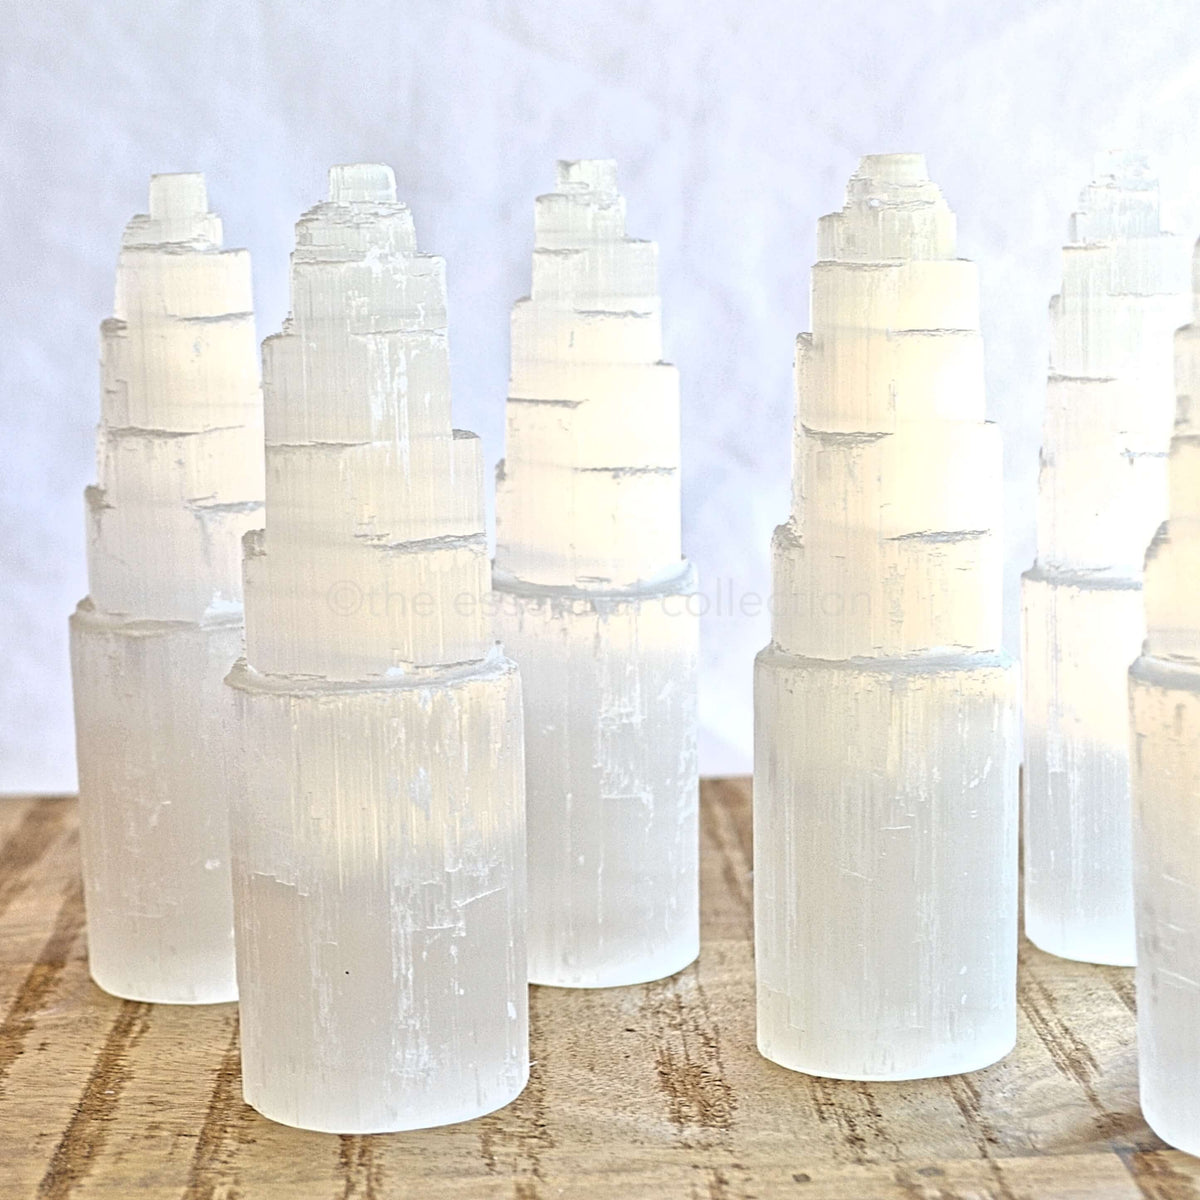 15cm white selenite towers on wood table